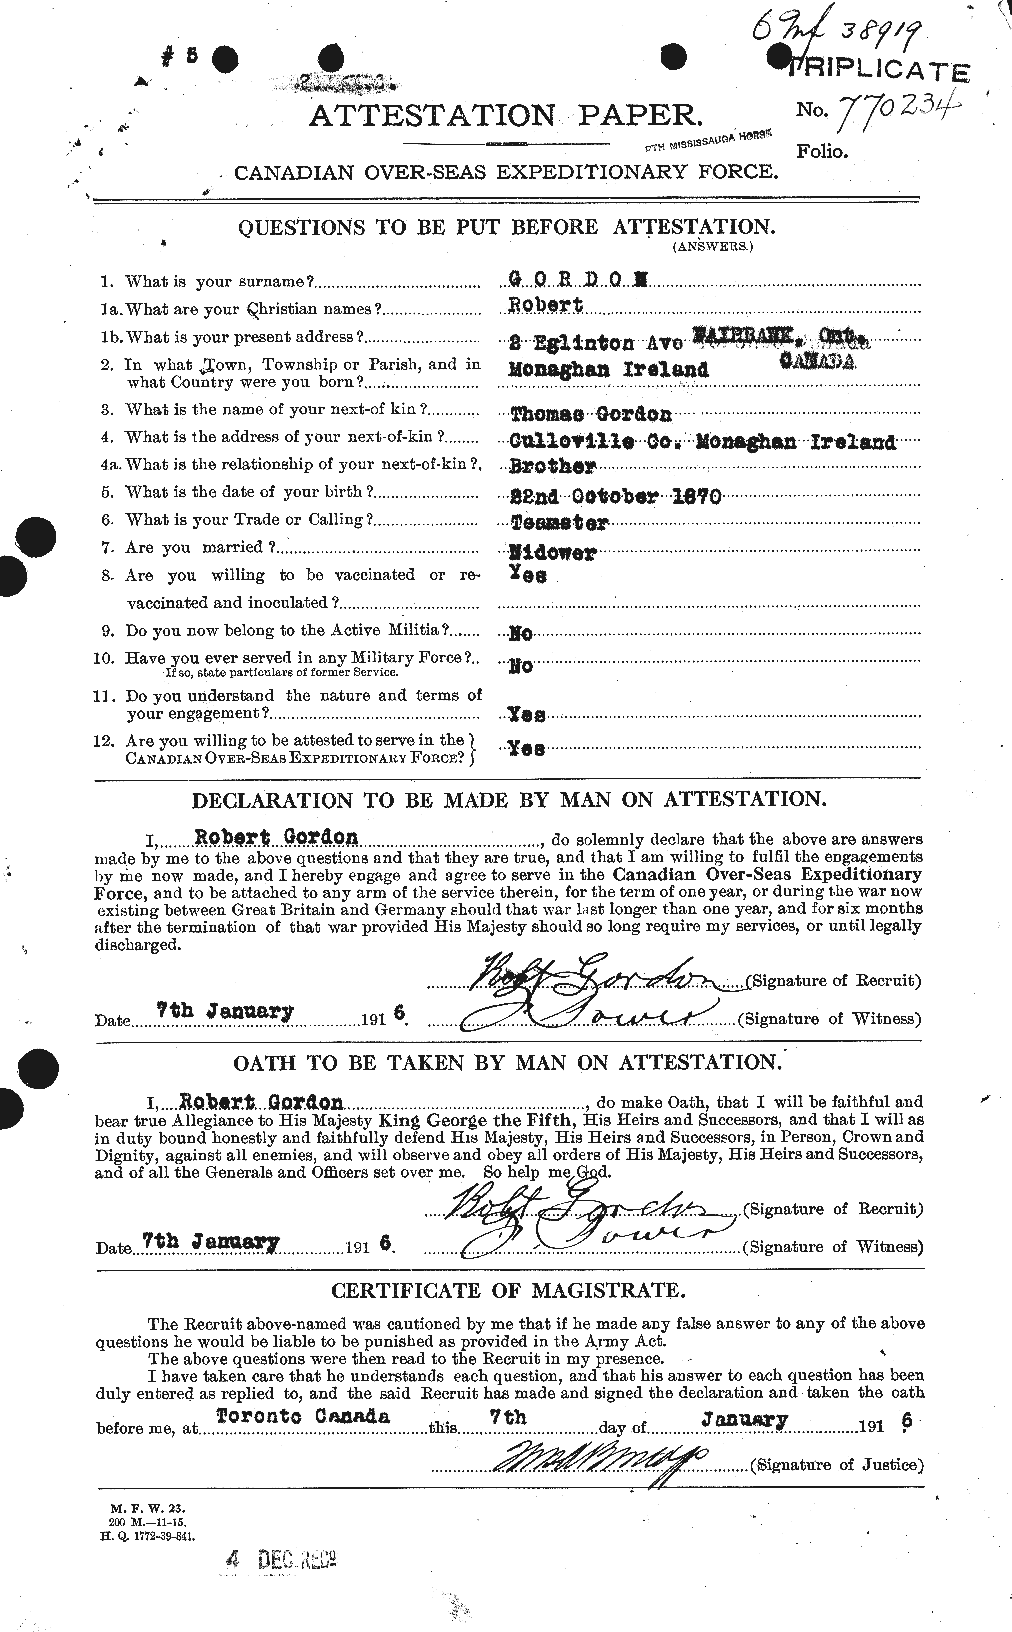 Personnel Records of the First World War - CEF 355925a